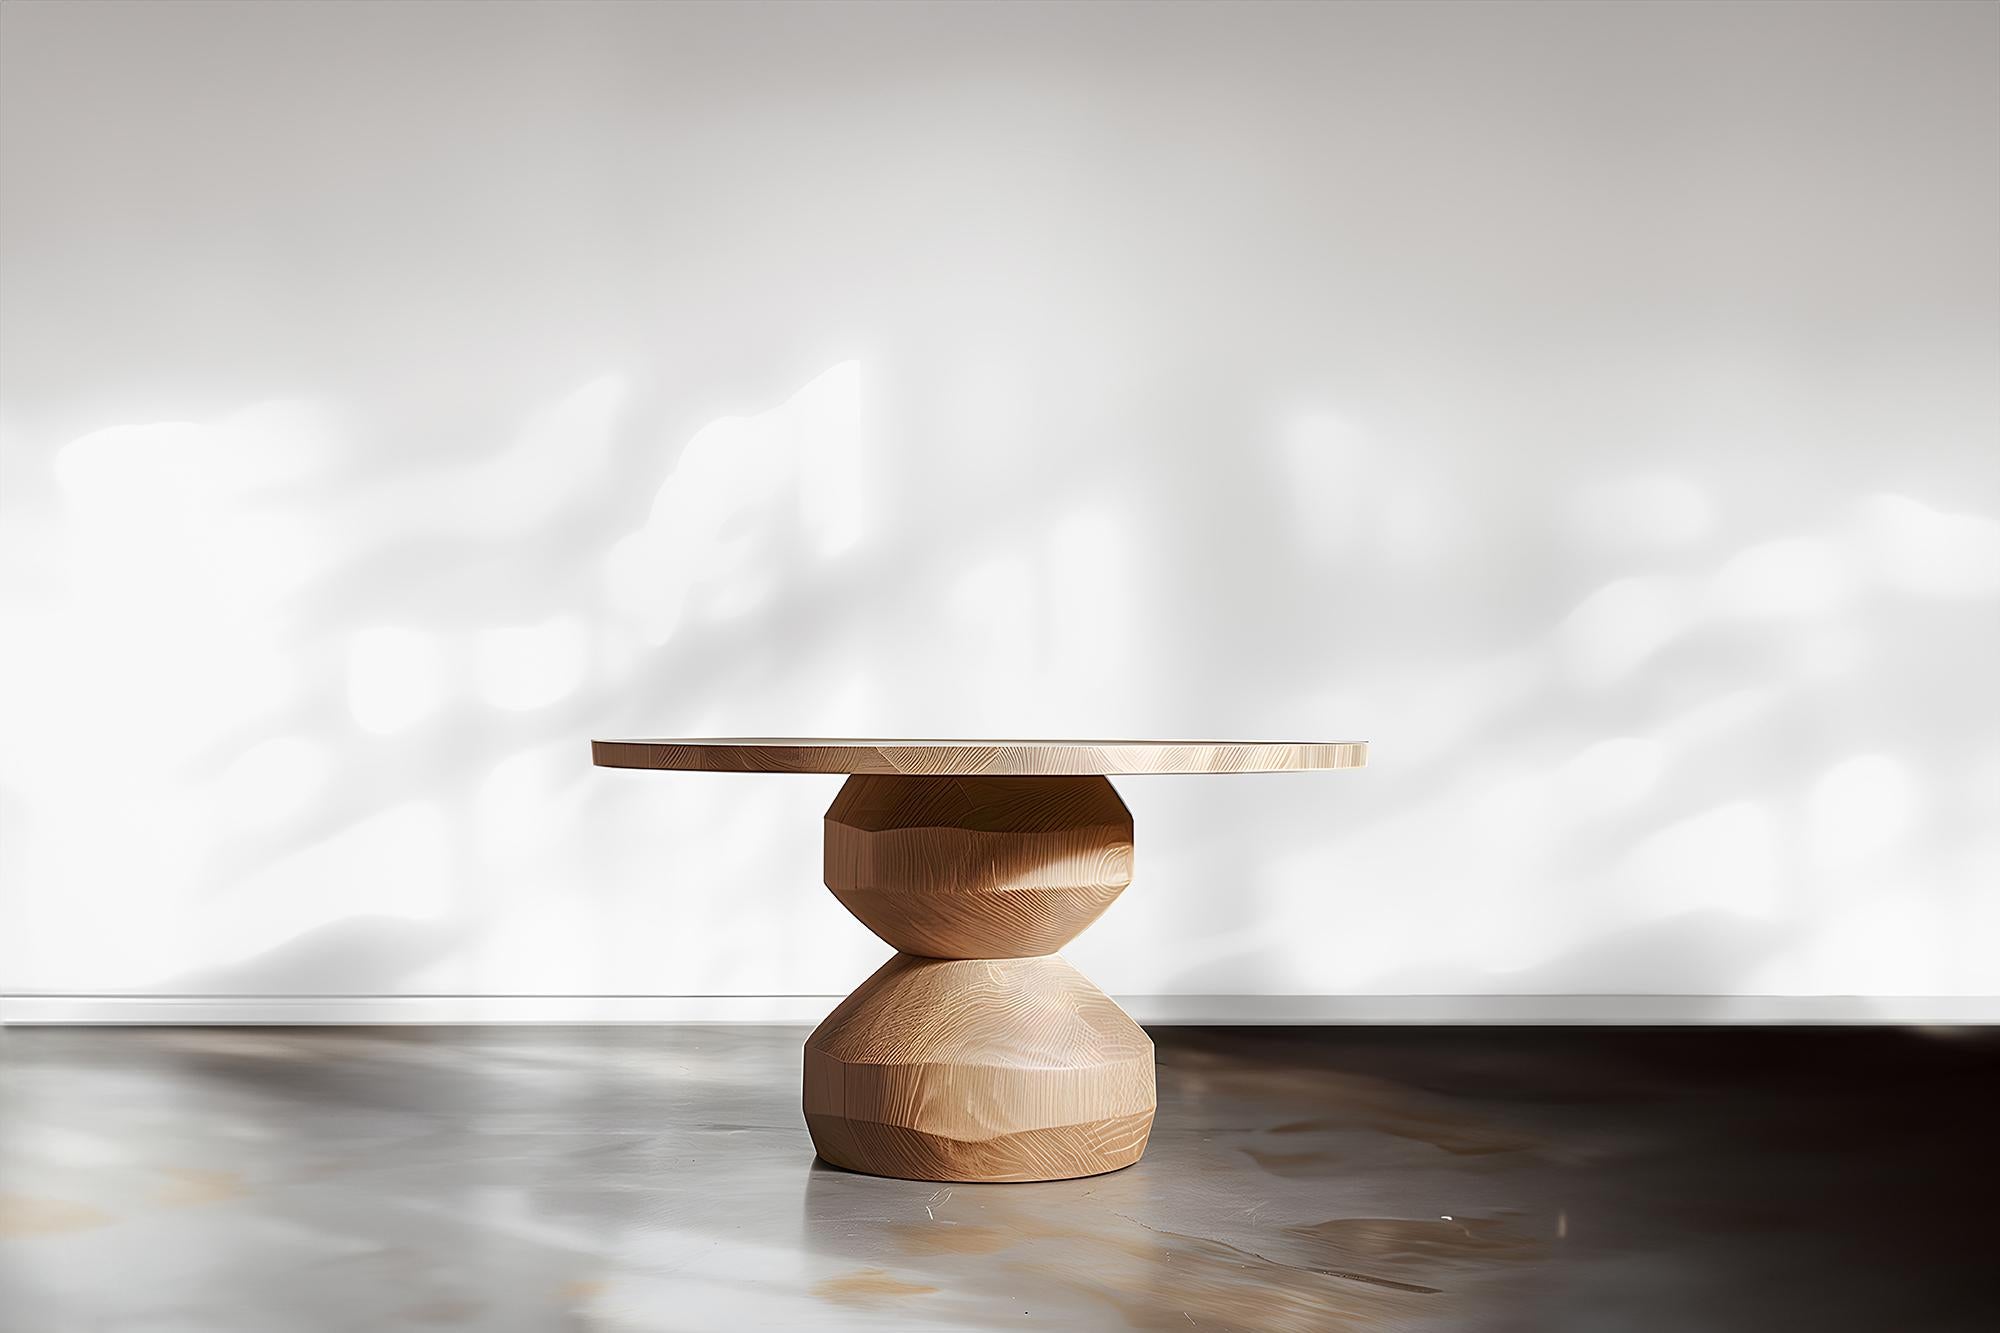 Joel Escalona's Design No07, Socle Card and Tea Tables in Wood
——

Introducing the 